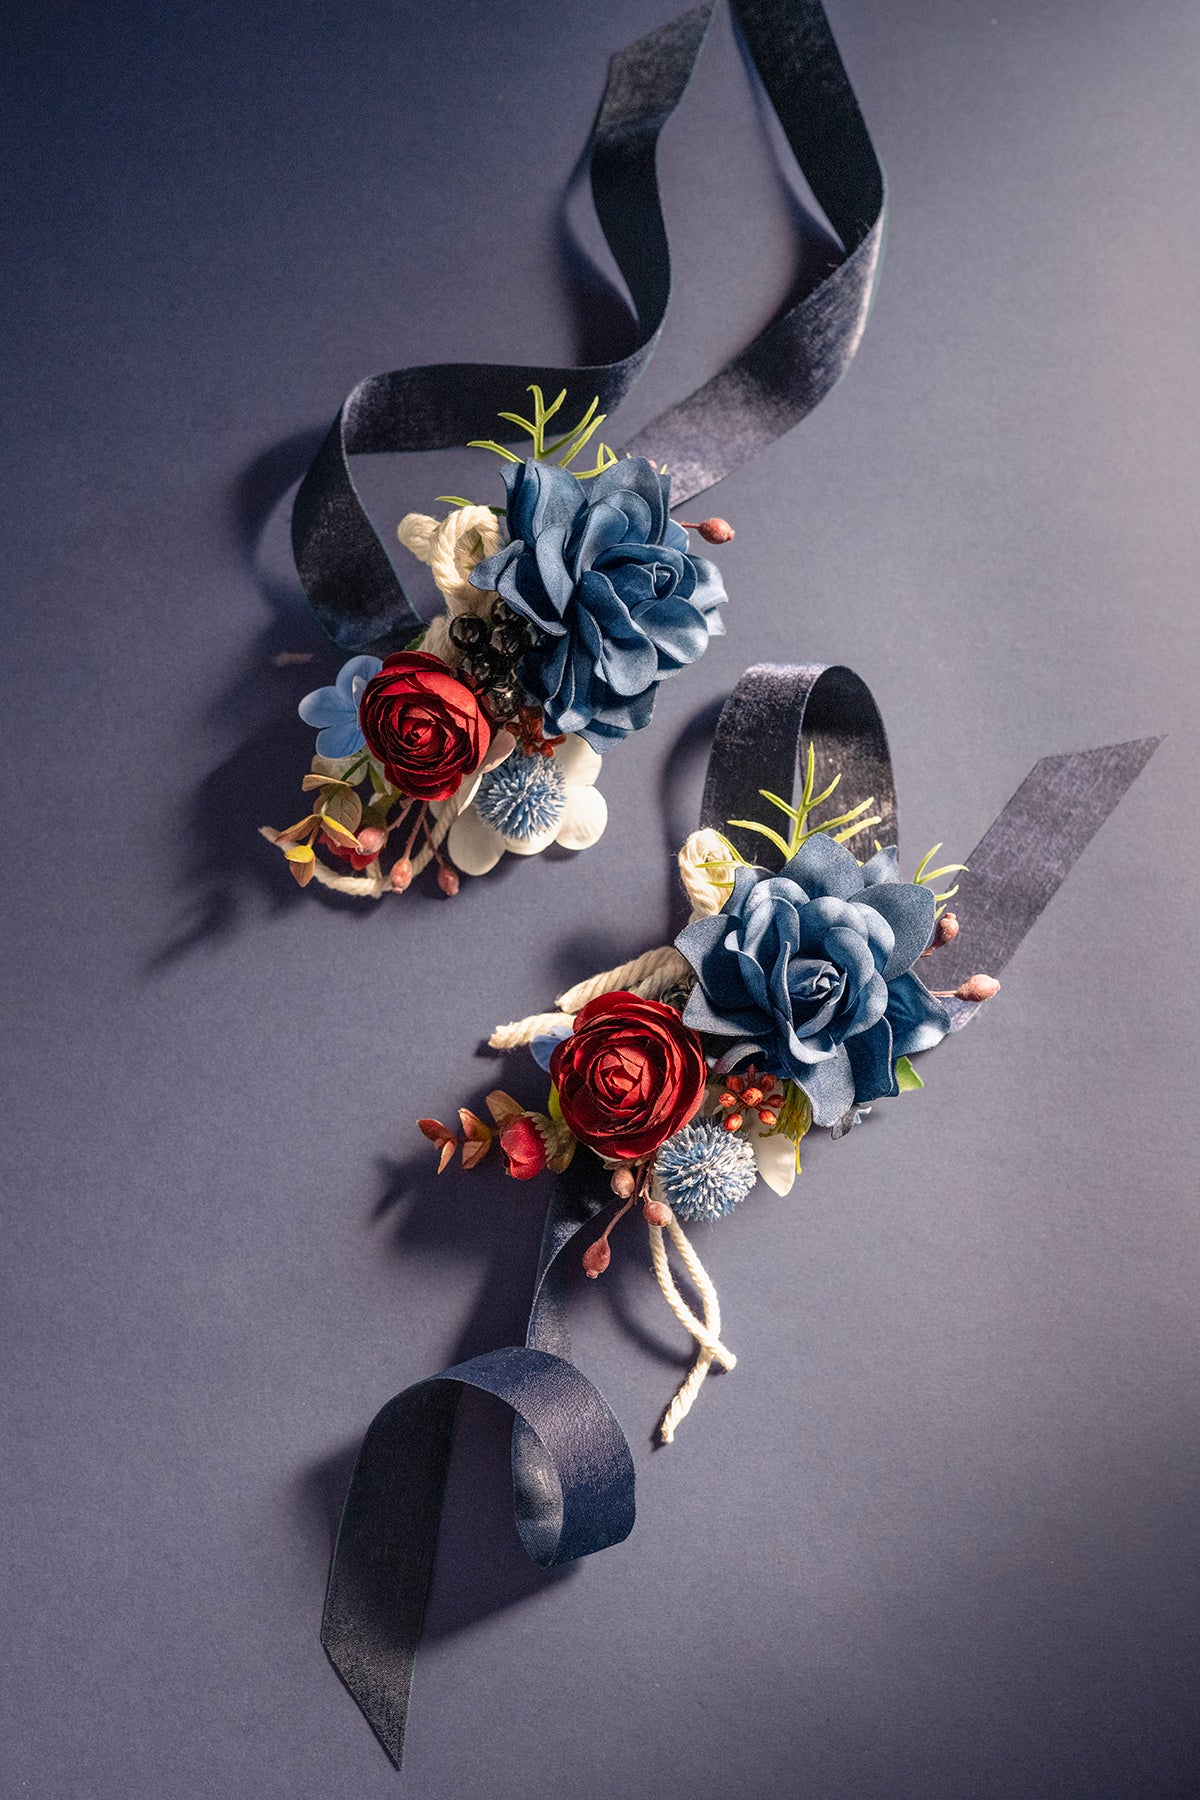 Wrist and Shoulder Corsages in Nautical Navy & Burgundy